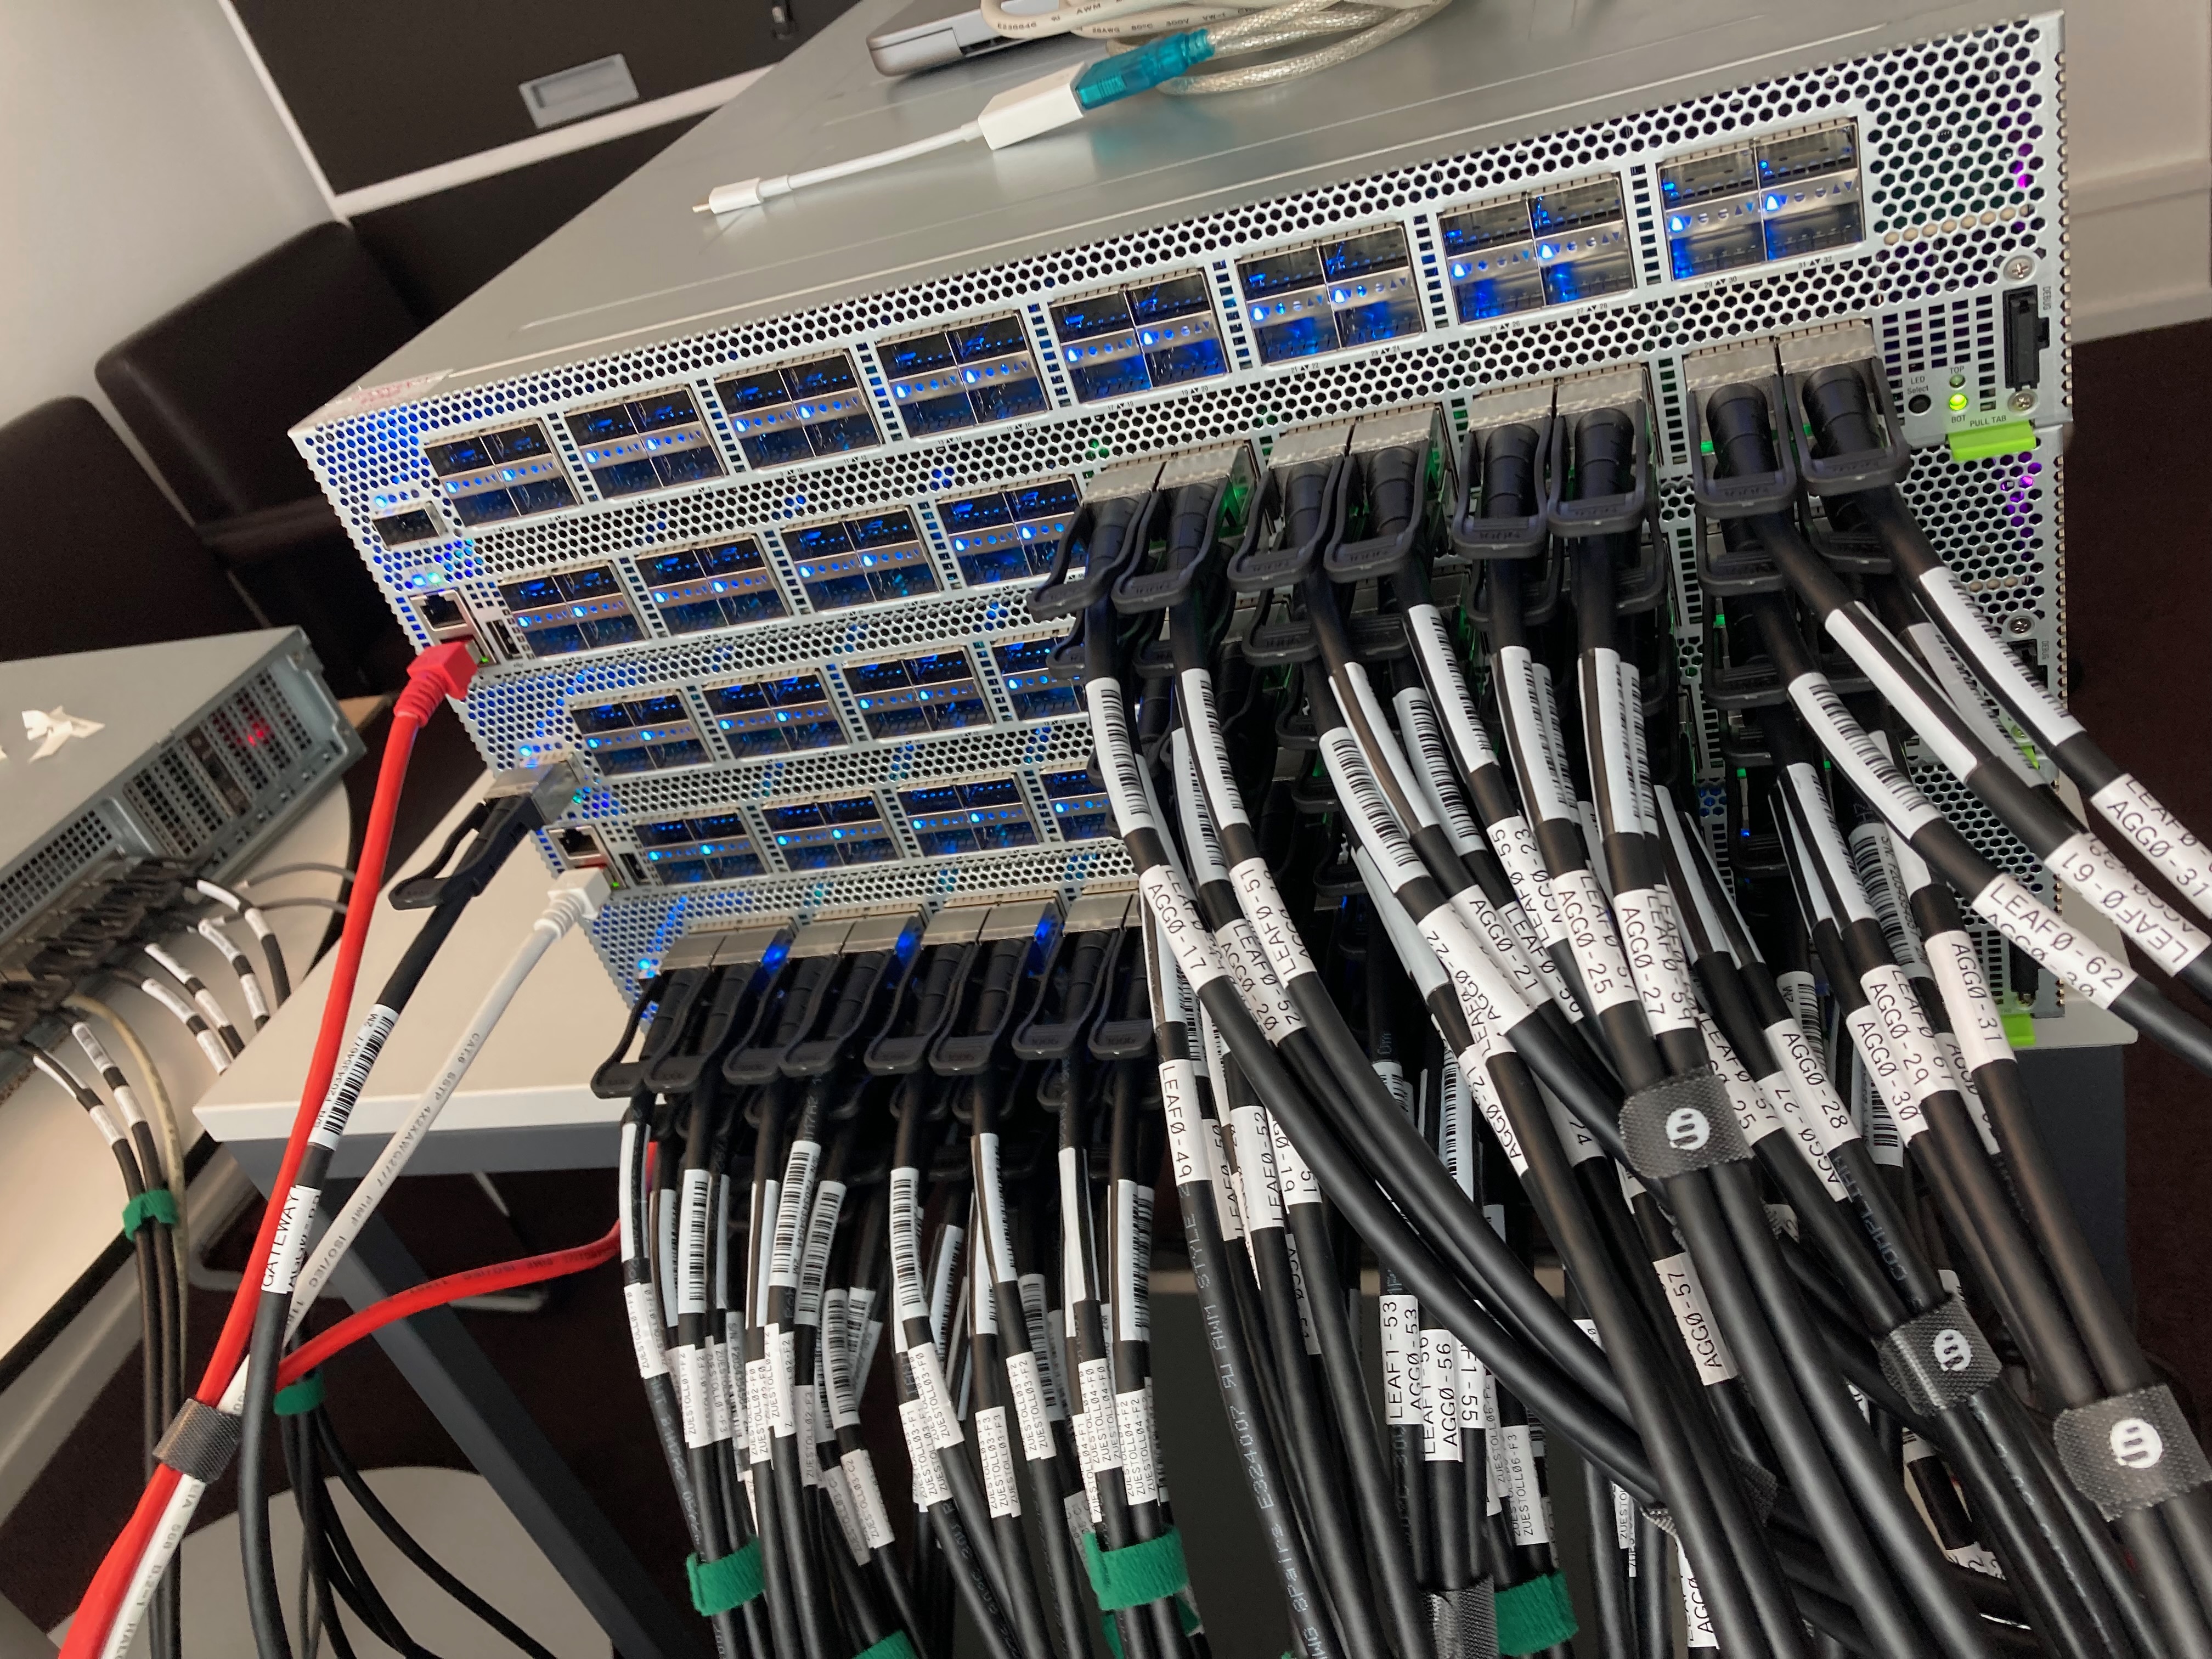 Our three 100G switches connected in our temporary server room